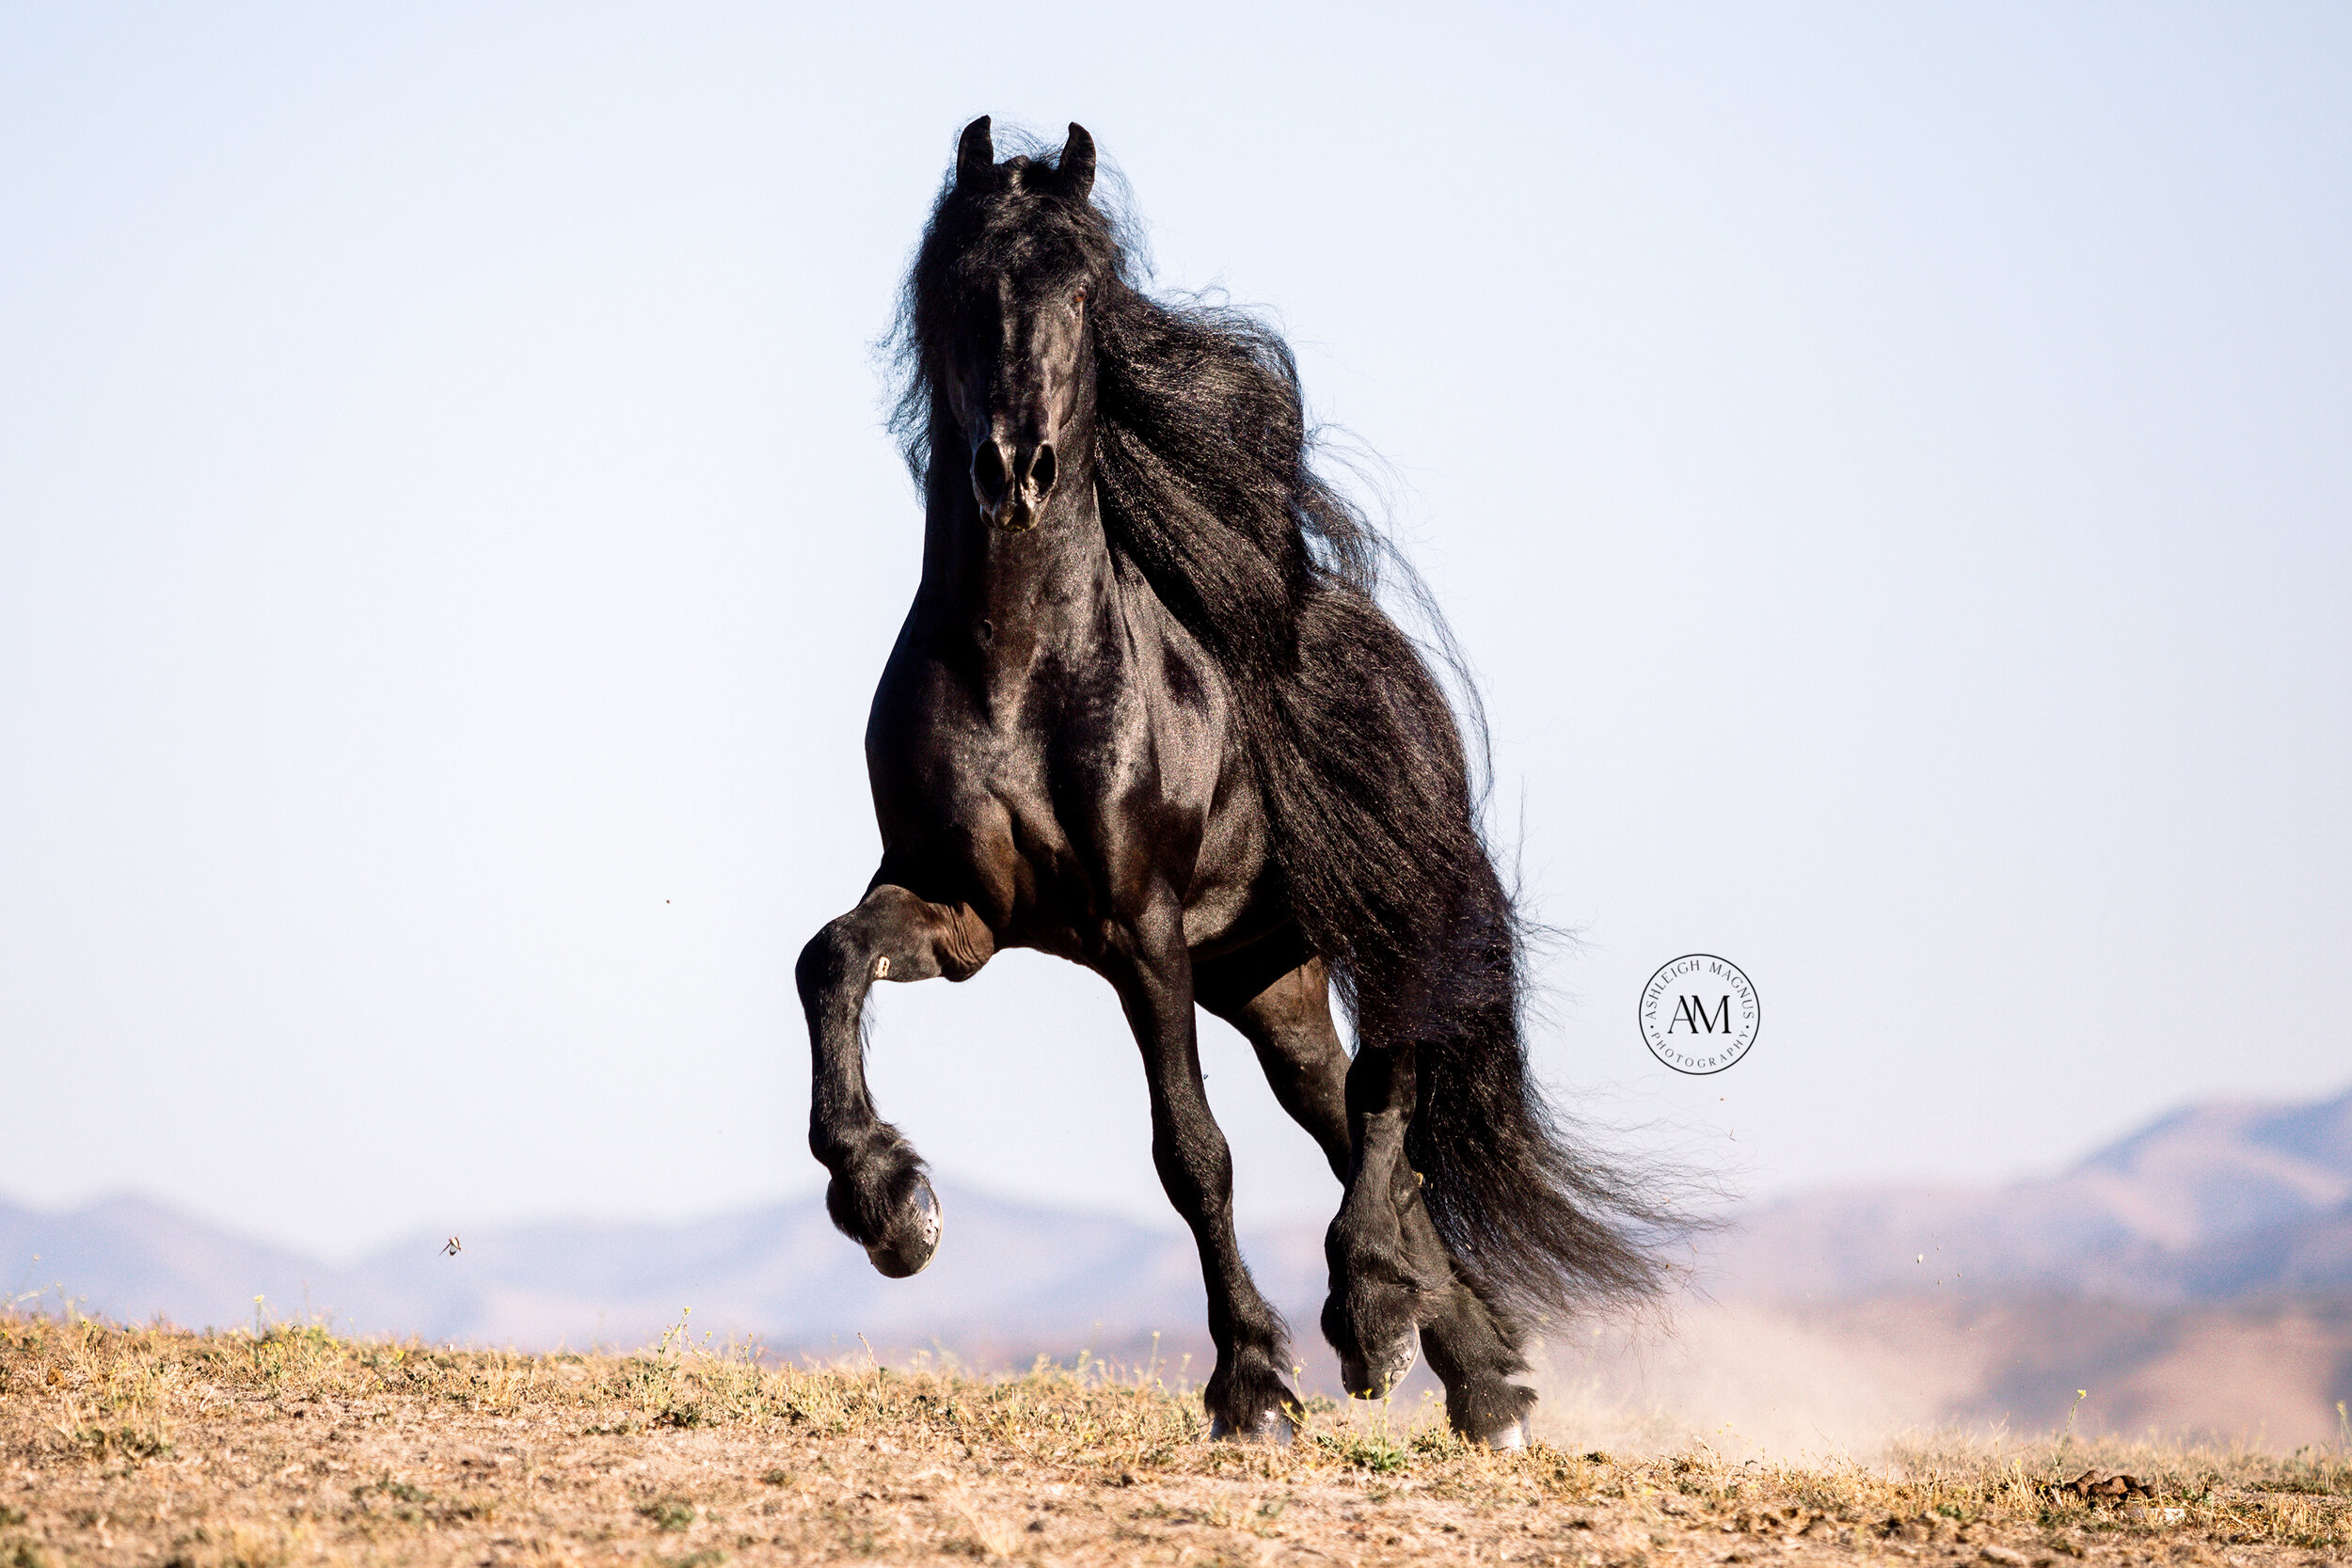 Black horse with flowing mane running in field